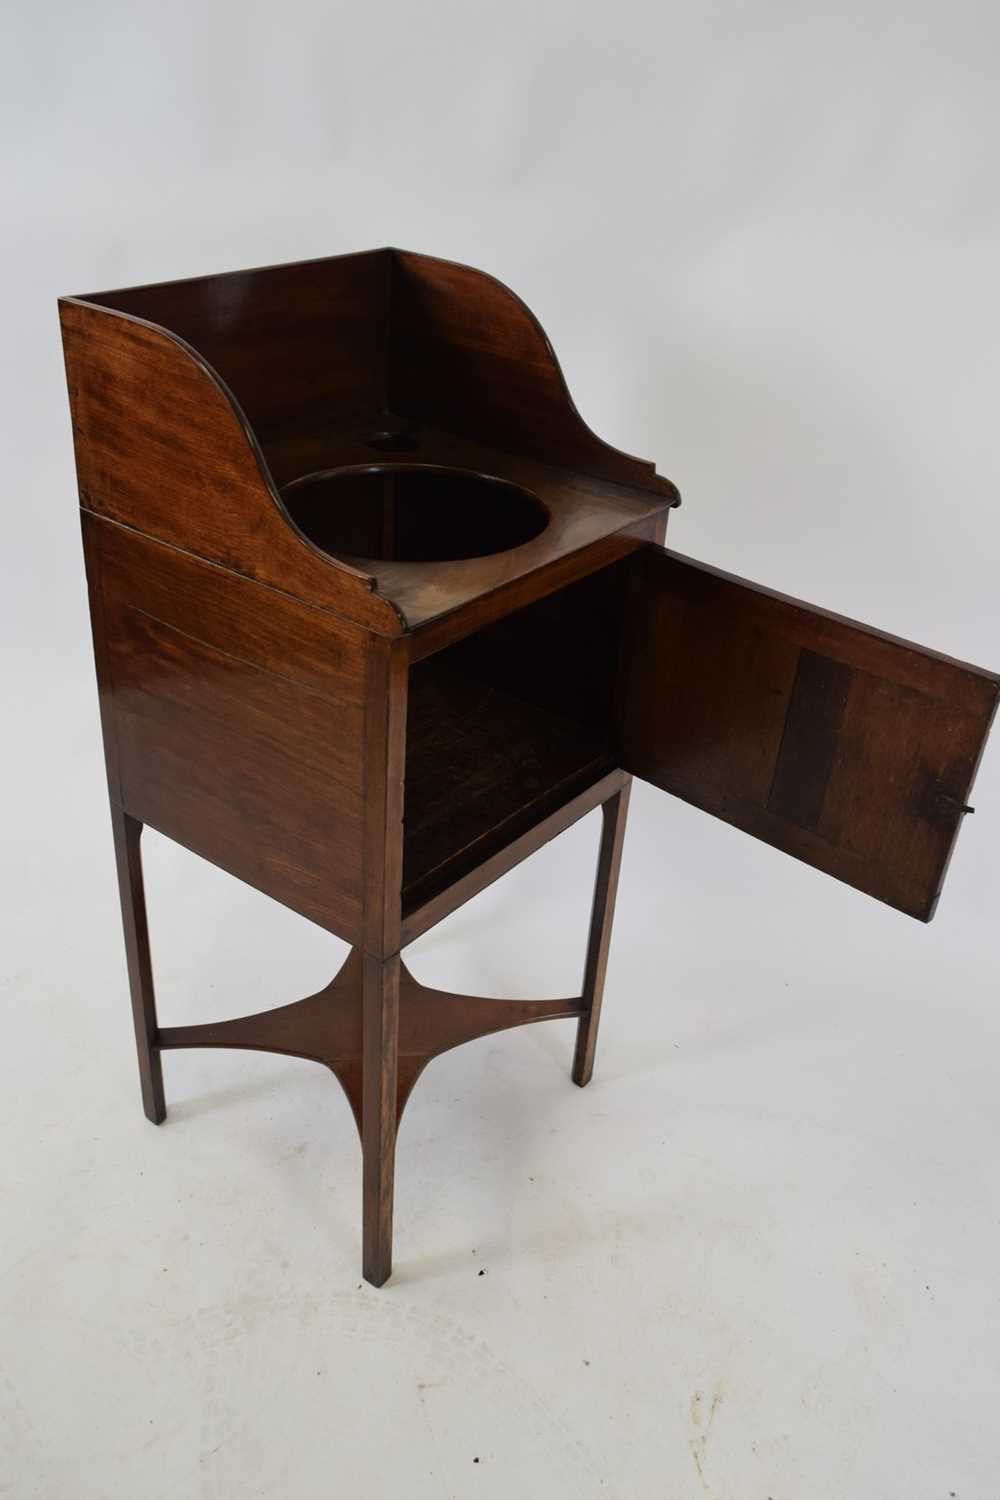 19th century mahogany wash stand of square form with galleried back, three apertures and a single - Image 2 of 4